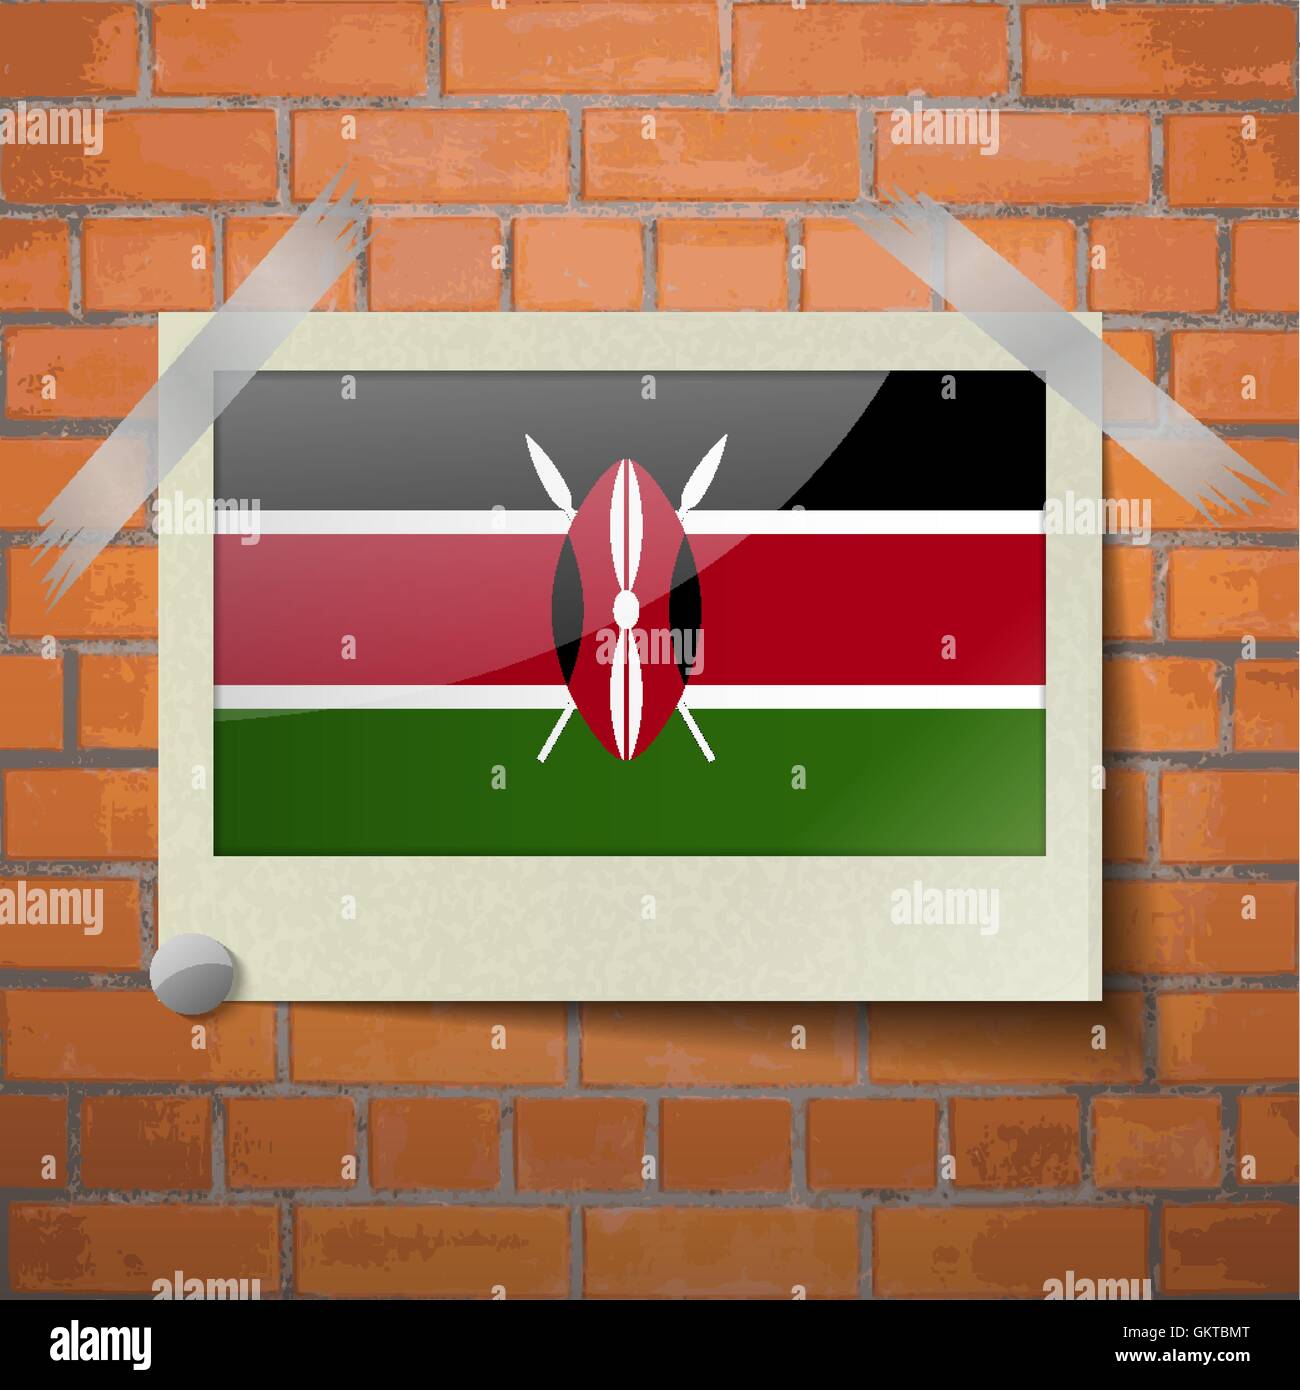 Flags Kenya scotch taped to a red brick wall Stock Vector